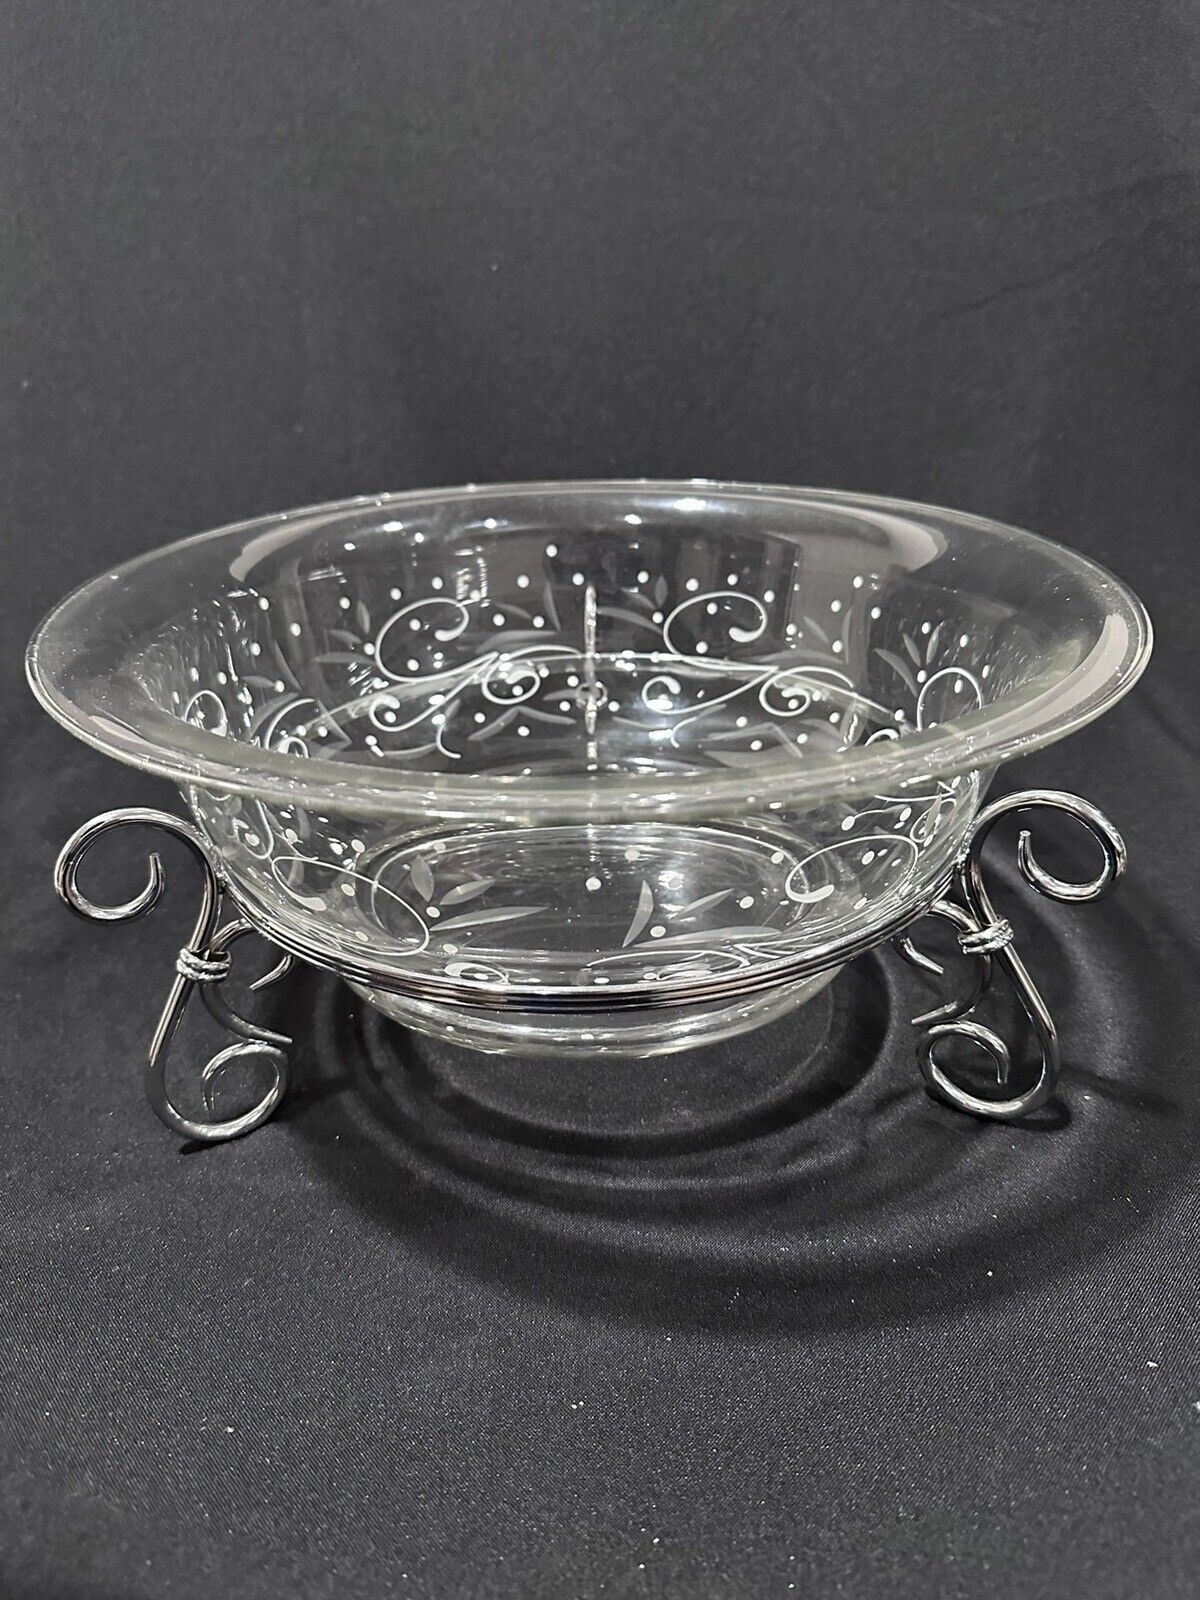 Partylite White Radiance 3-Wick Holder Glass Bowl P8215G w/stand